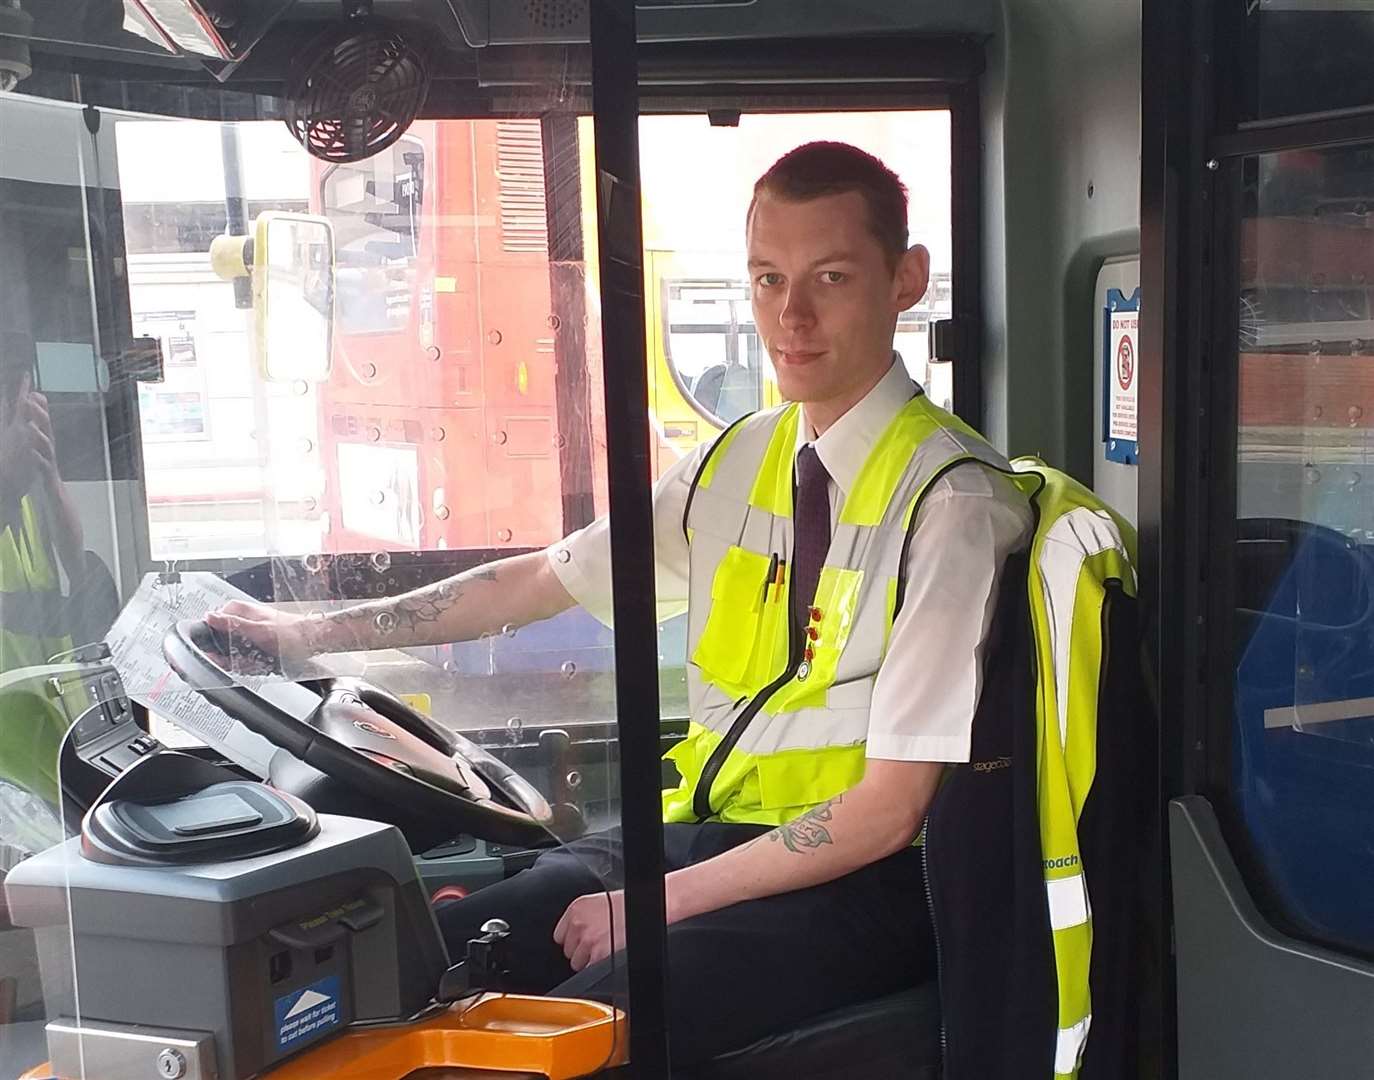 Kieran Greig helped save a passenger's life after they became ill on a bus journey in Hythe. Picture: Stagecoach